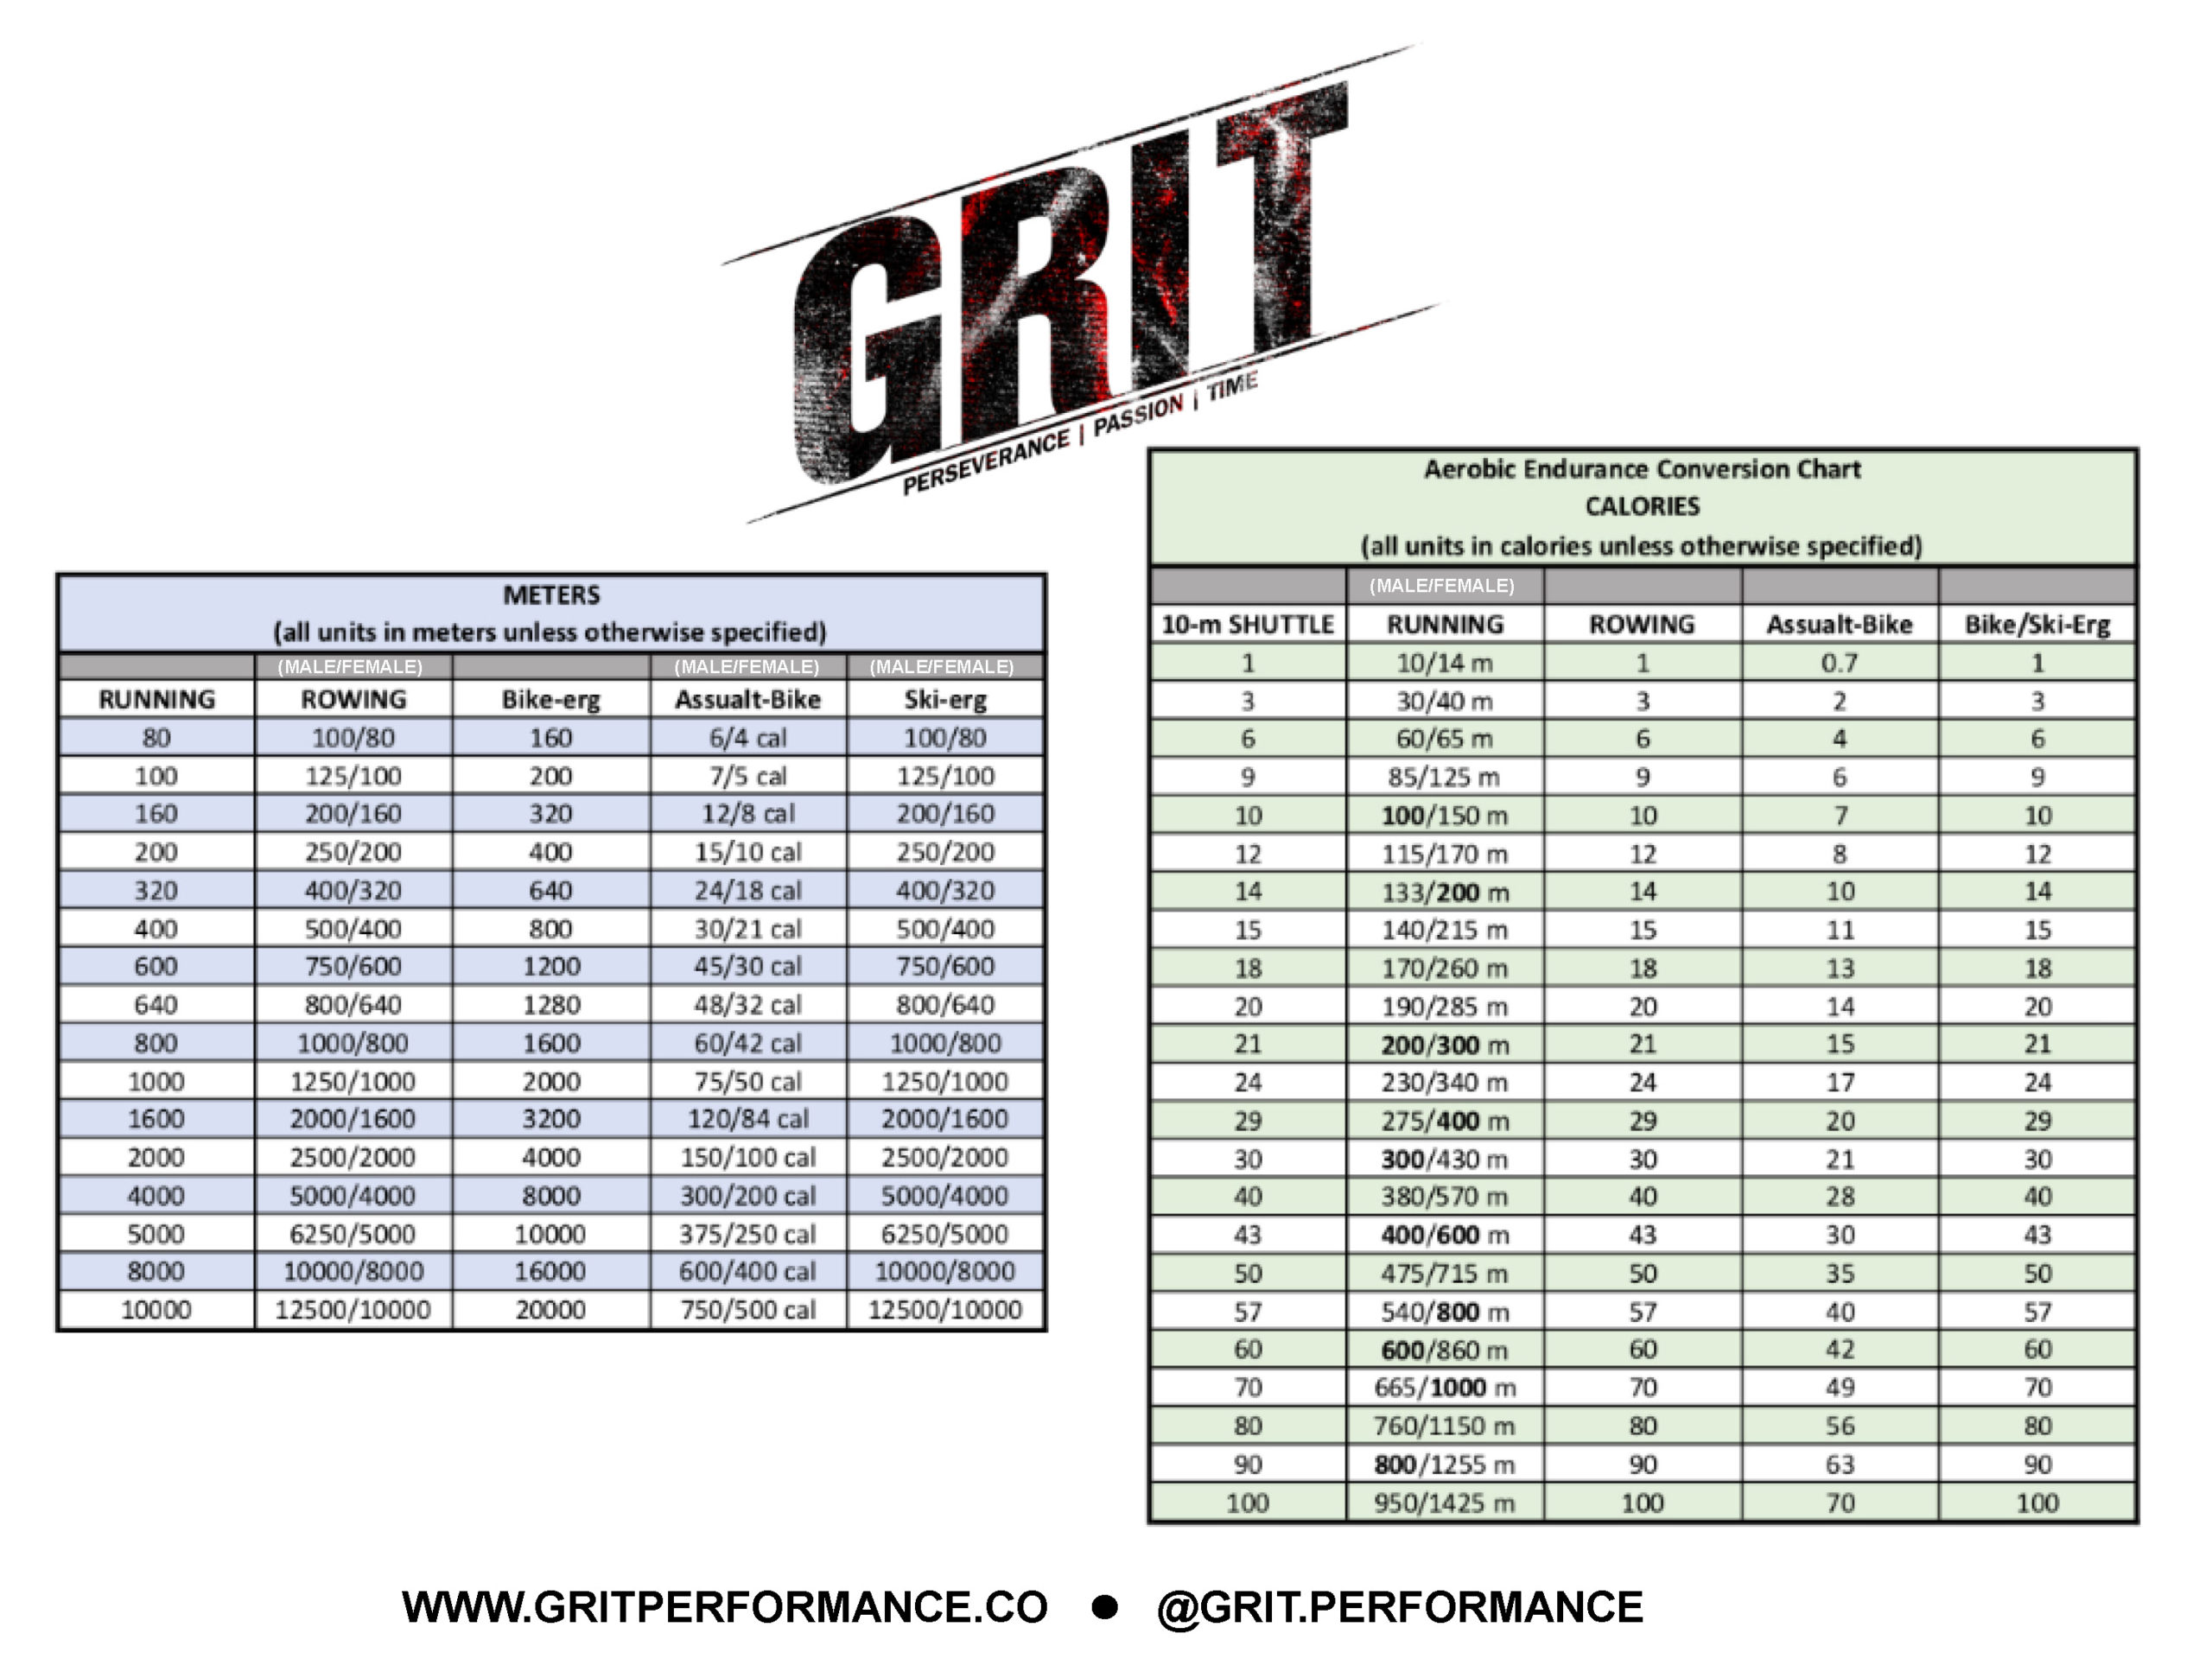 grit scale